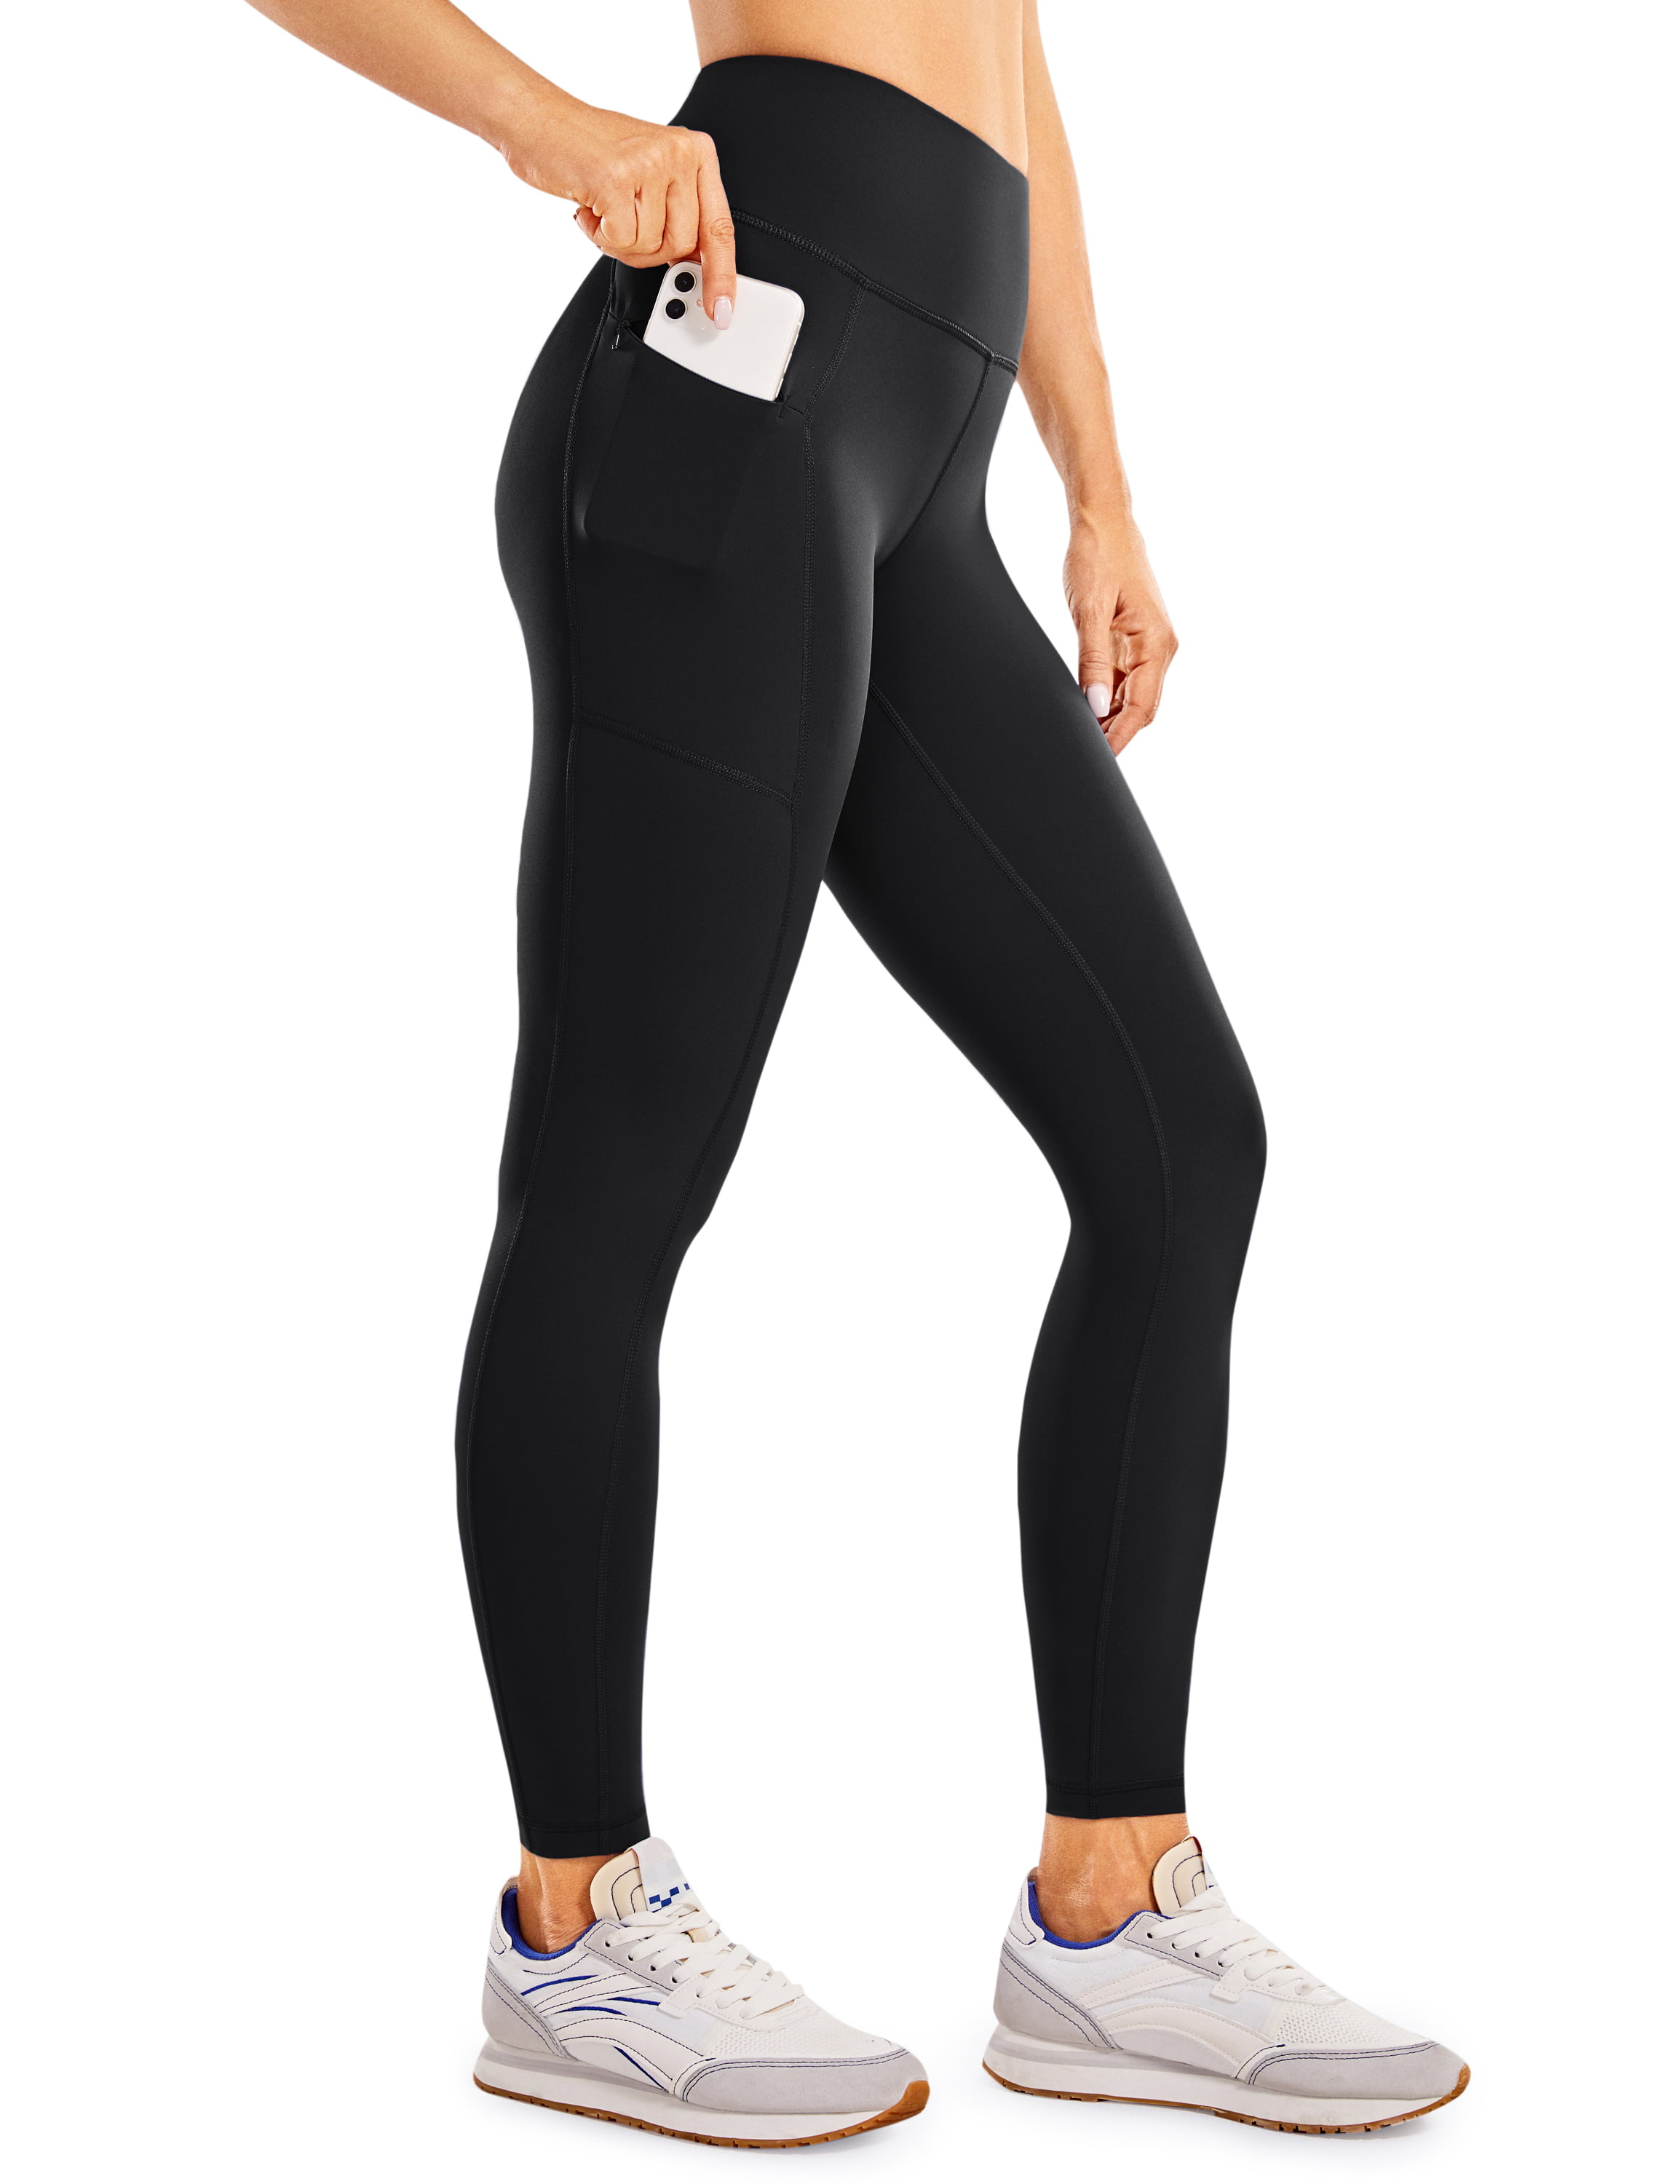 CRZ YOGA Womens Naked Feeling High Waisted Yoga Pants Buttery Soft Workout Leggings with Pockets 28 Inches 